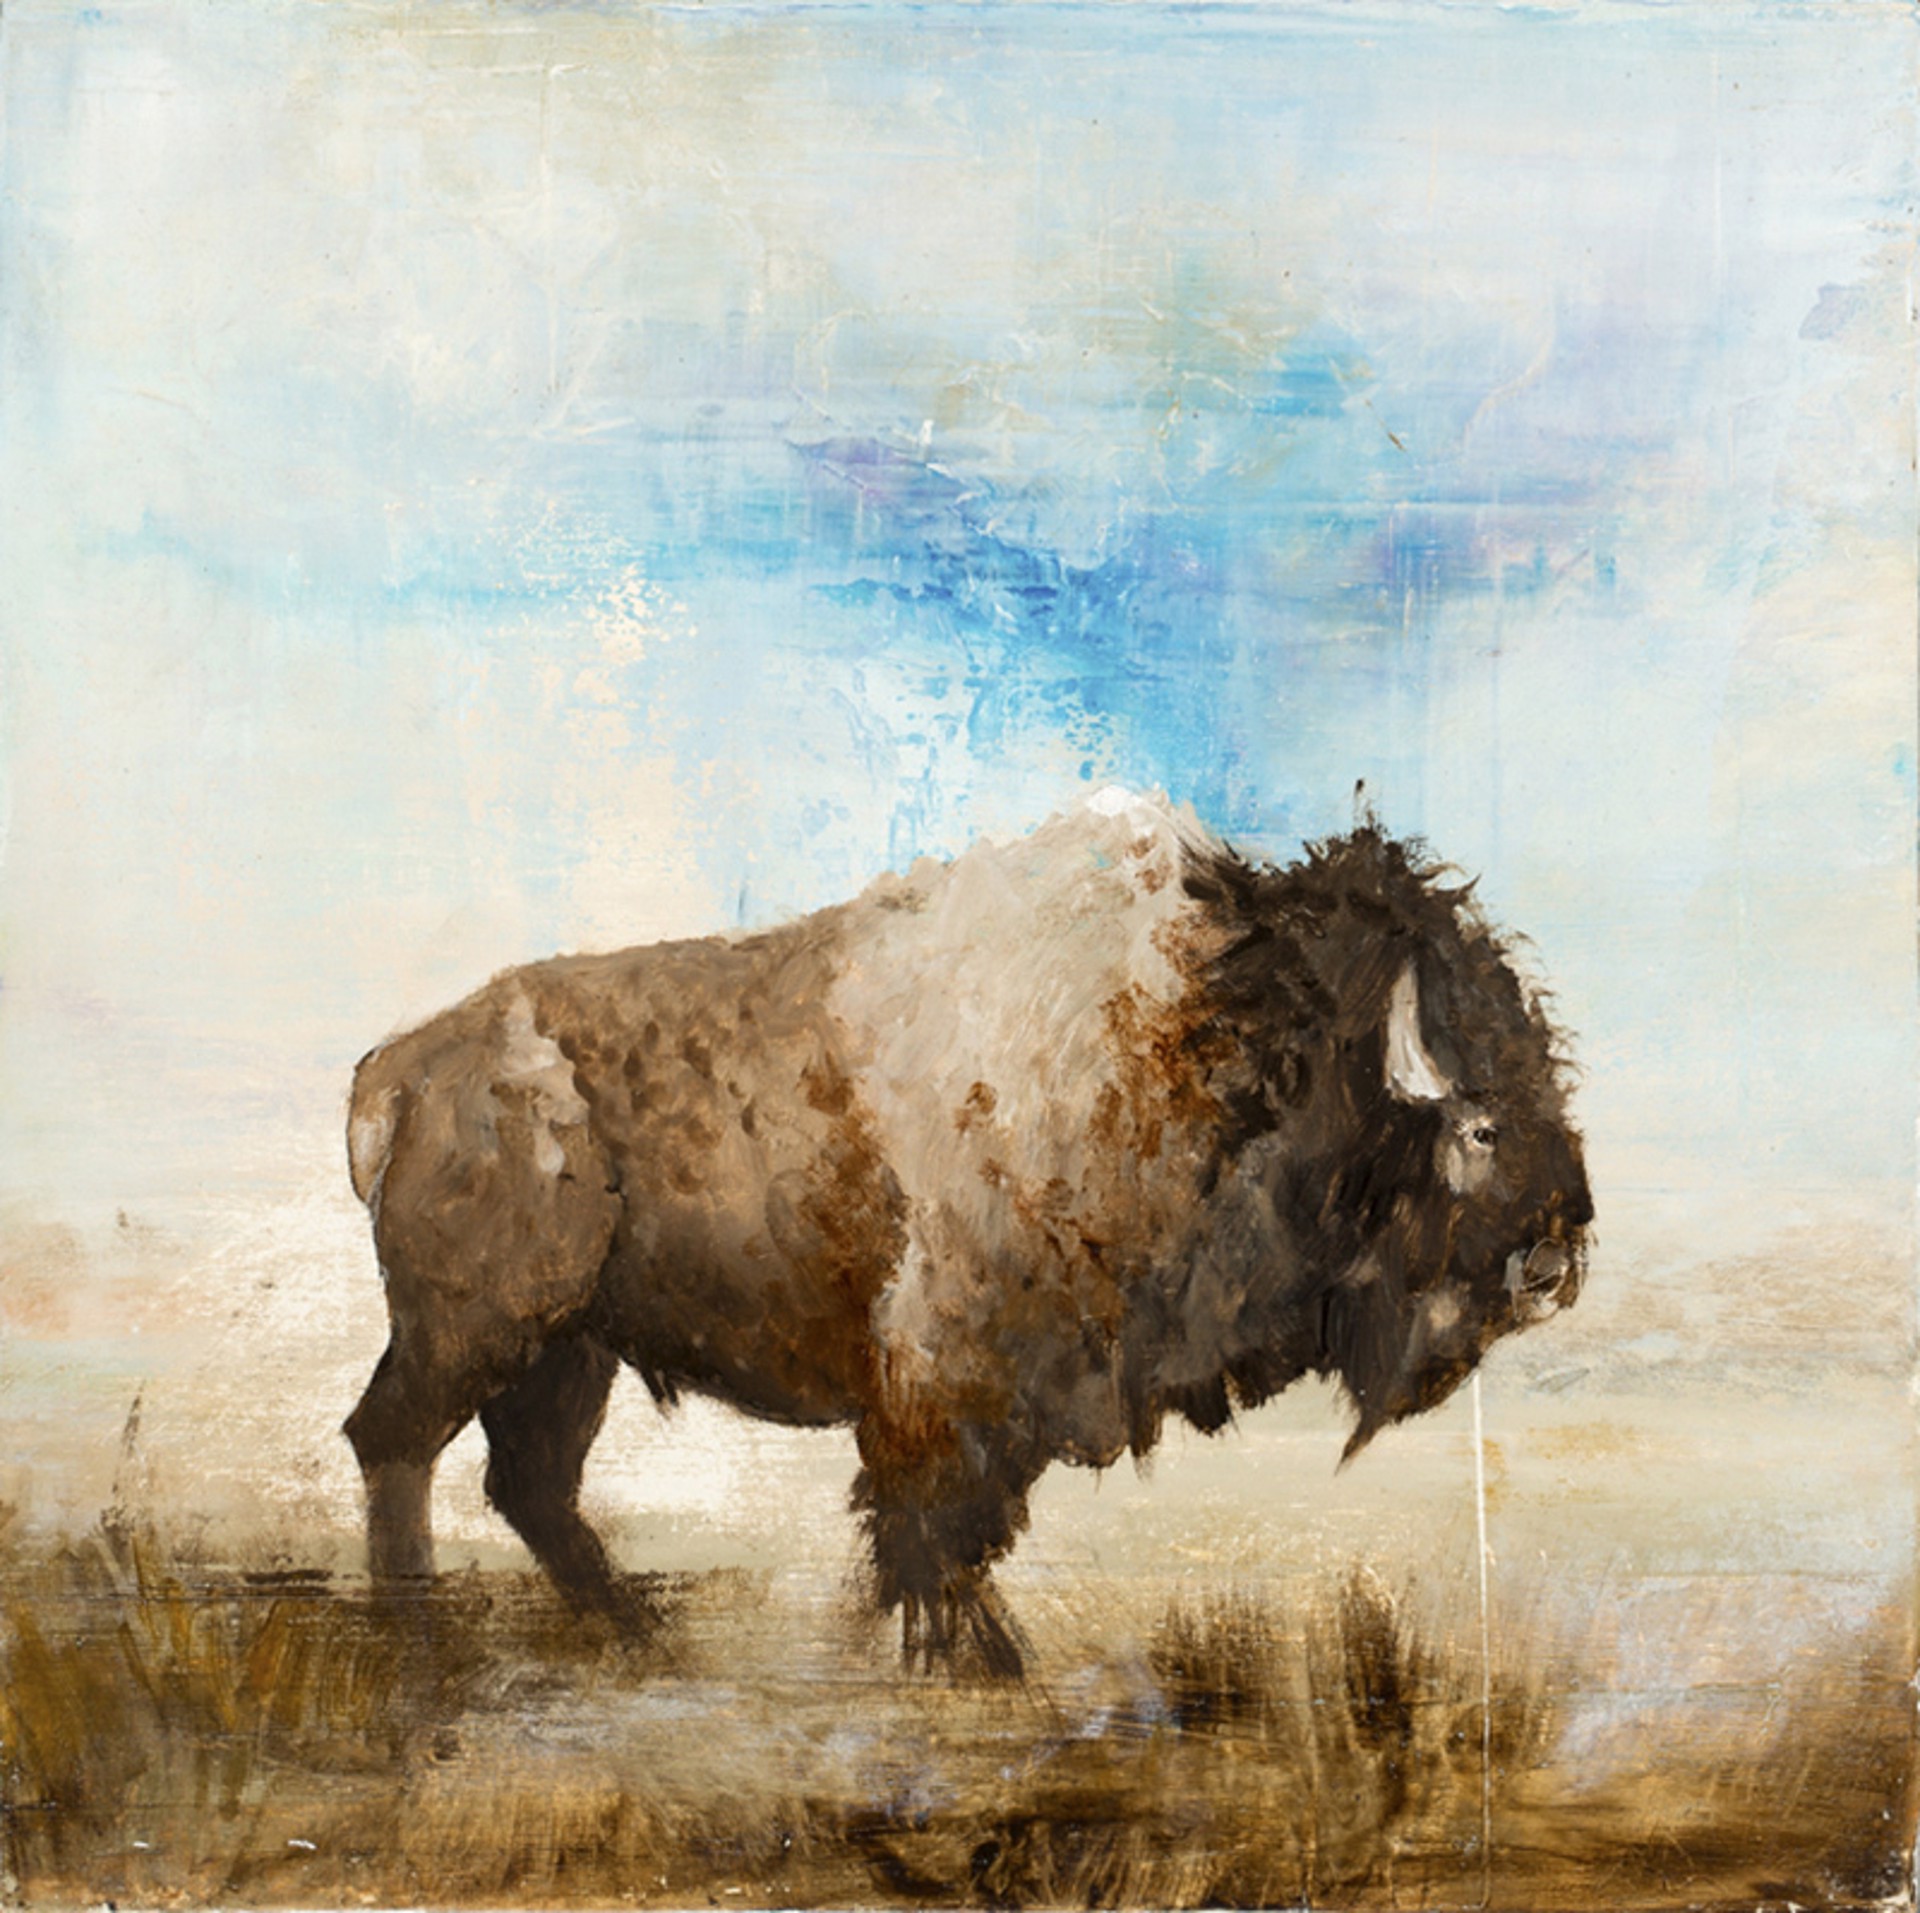 Contemporary Oil Painting Of A Bull Bison Profile Standing In A Field With Blue Sky And Clouds By Jenna Von Benedikt